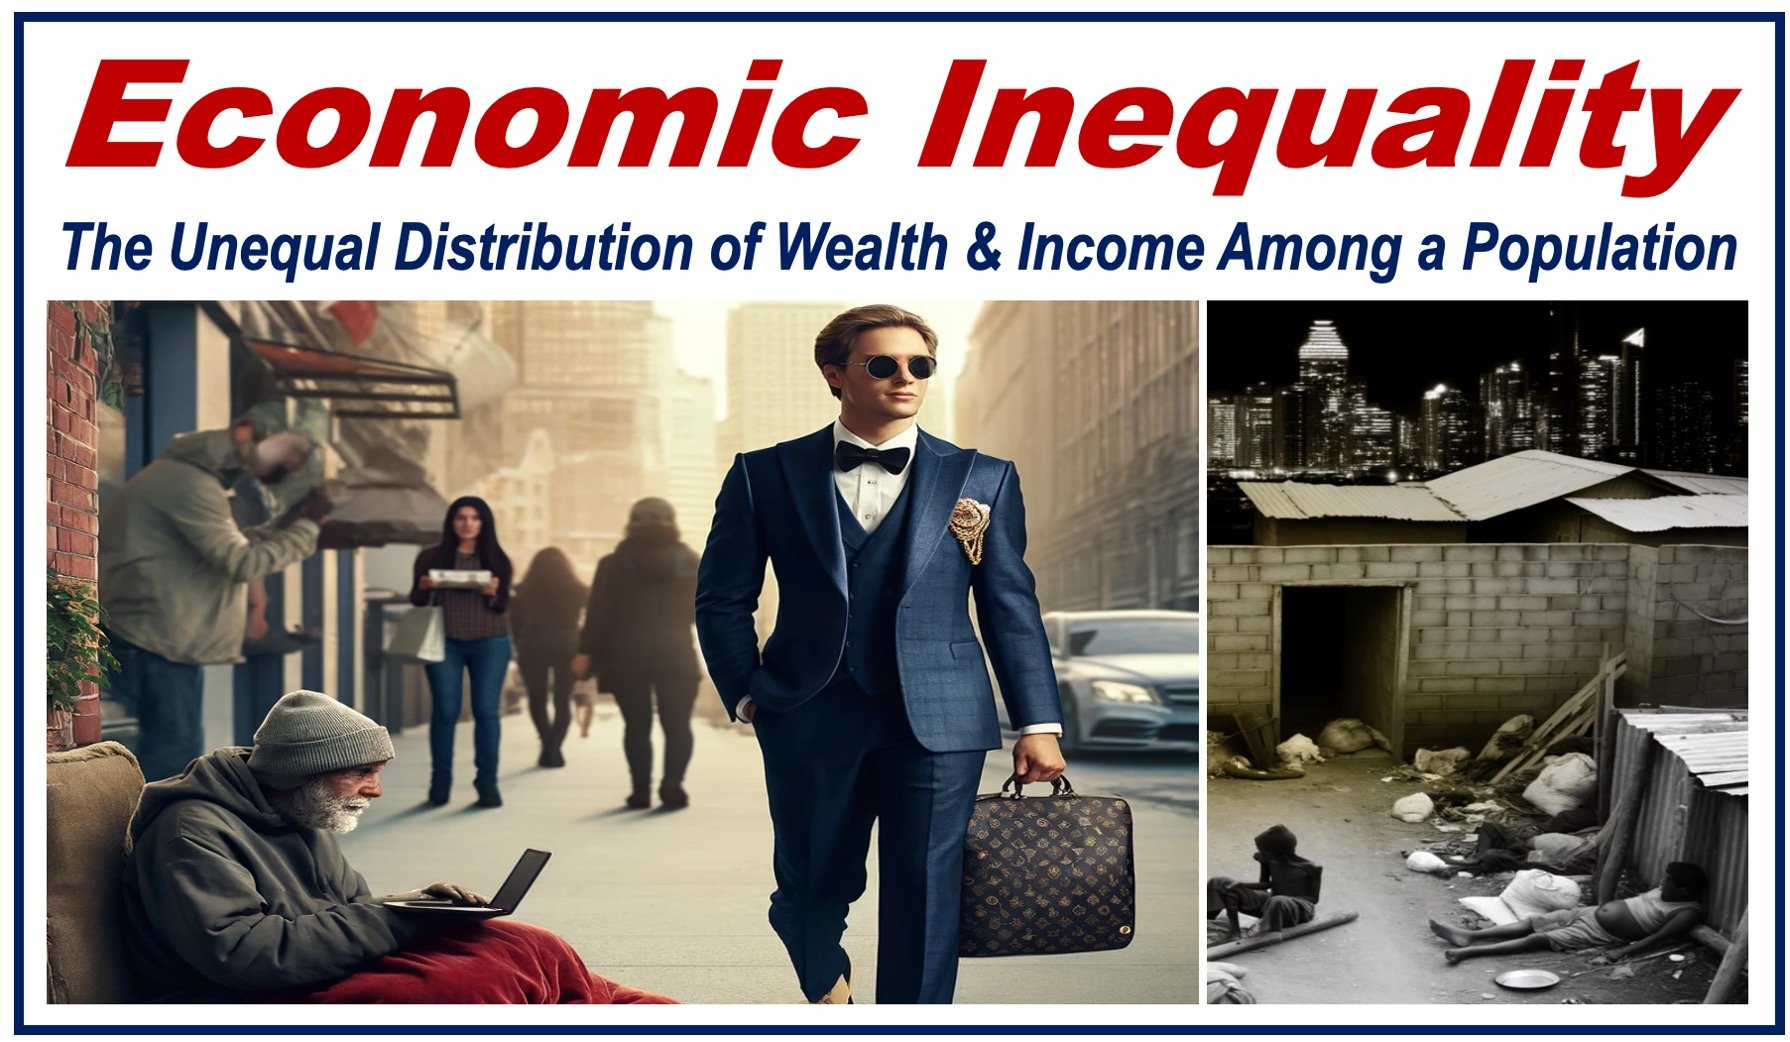 A wealthy man walking past a homeless man, a skyline of skyscrapers and a slum in front of it, plus a definition of Economic Inequality